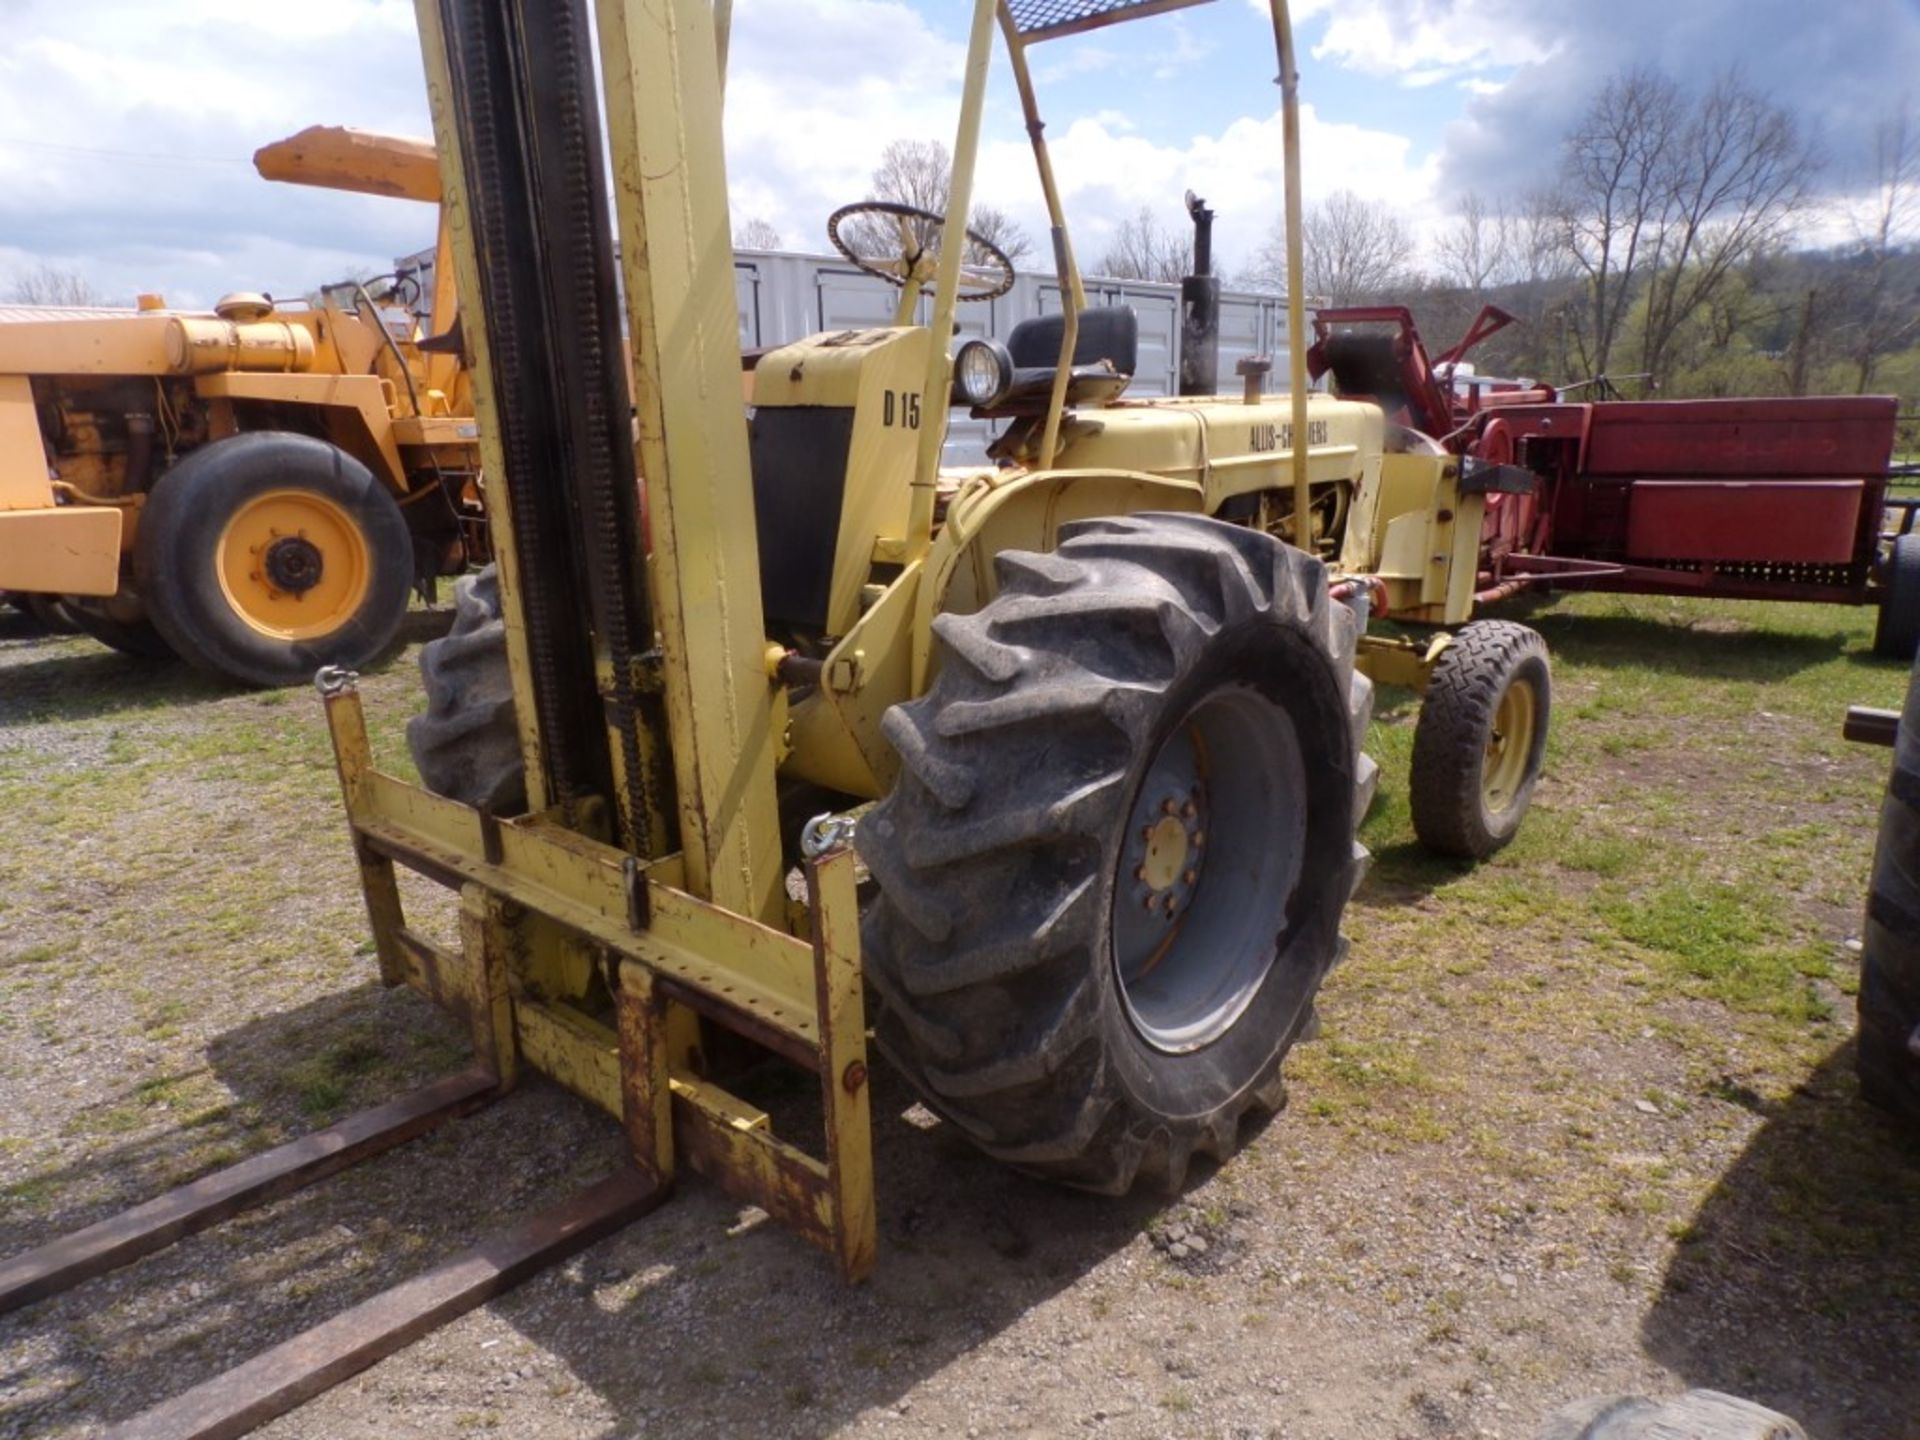 AC I-600 Rough Terrain Forklift w/ Side Shift, Yellow, Runs & Operates (4455) - Image 3 of 5